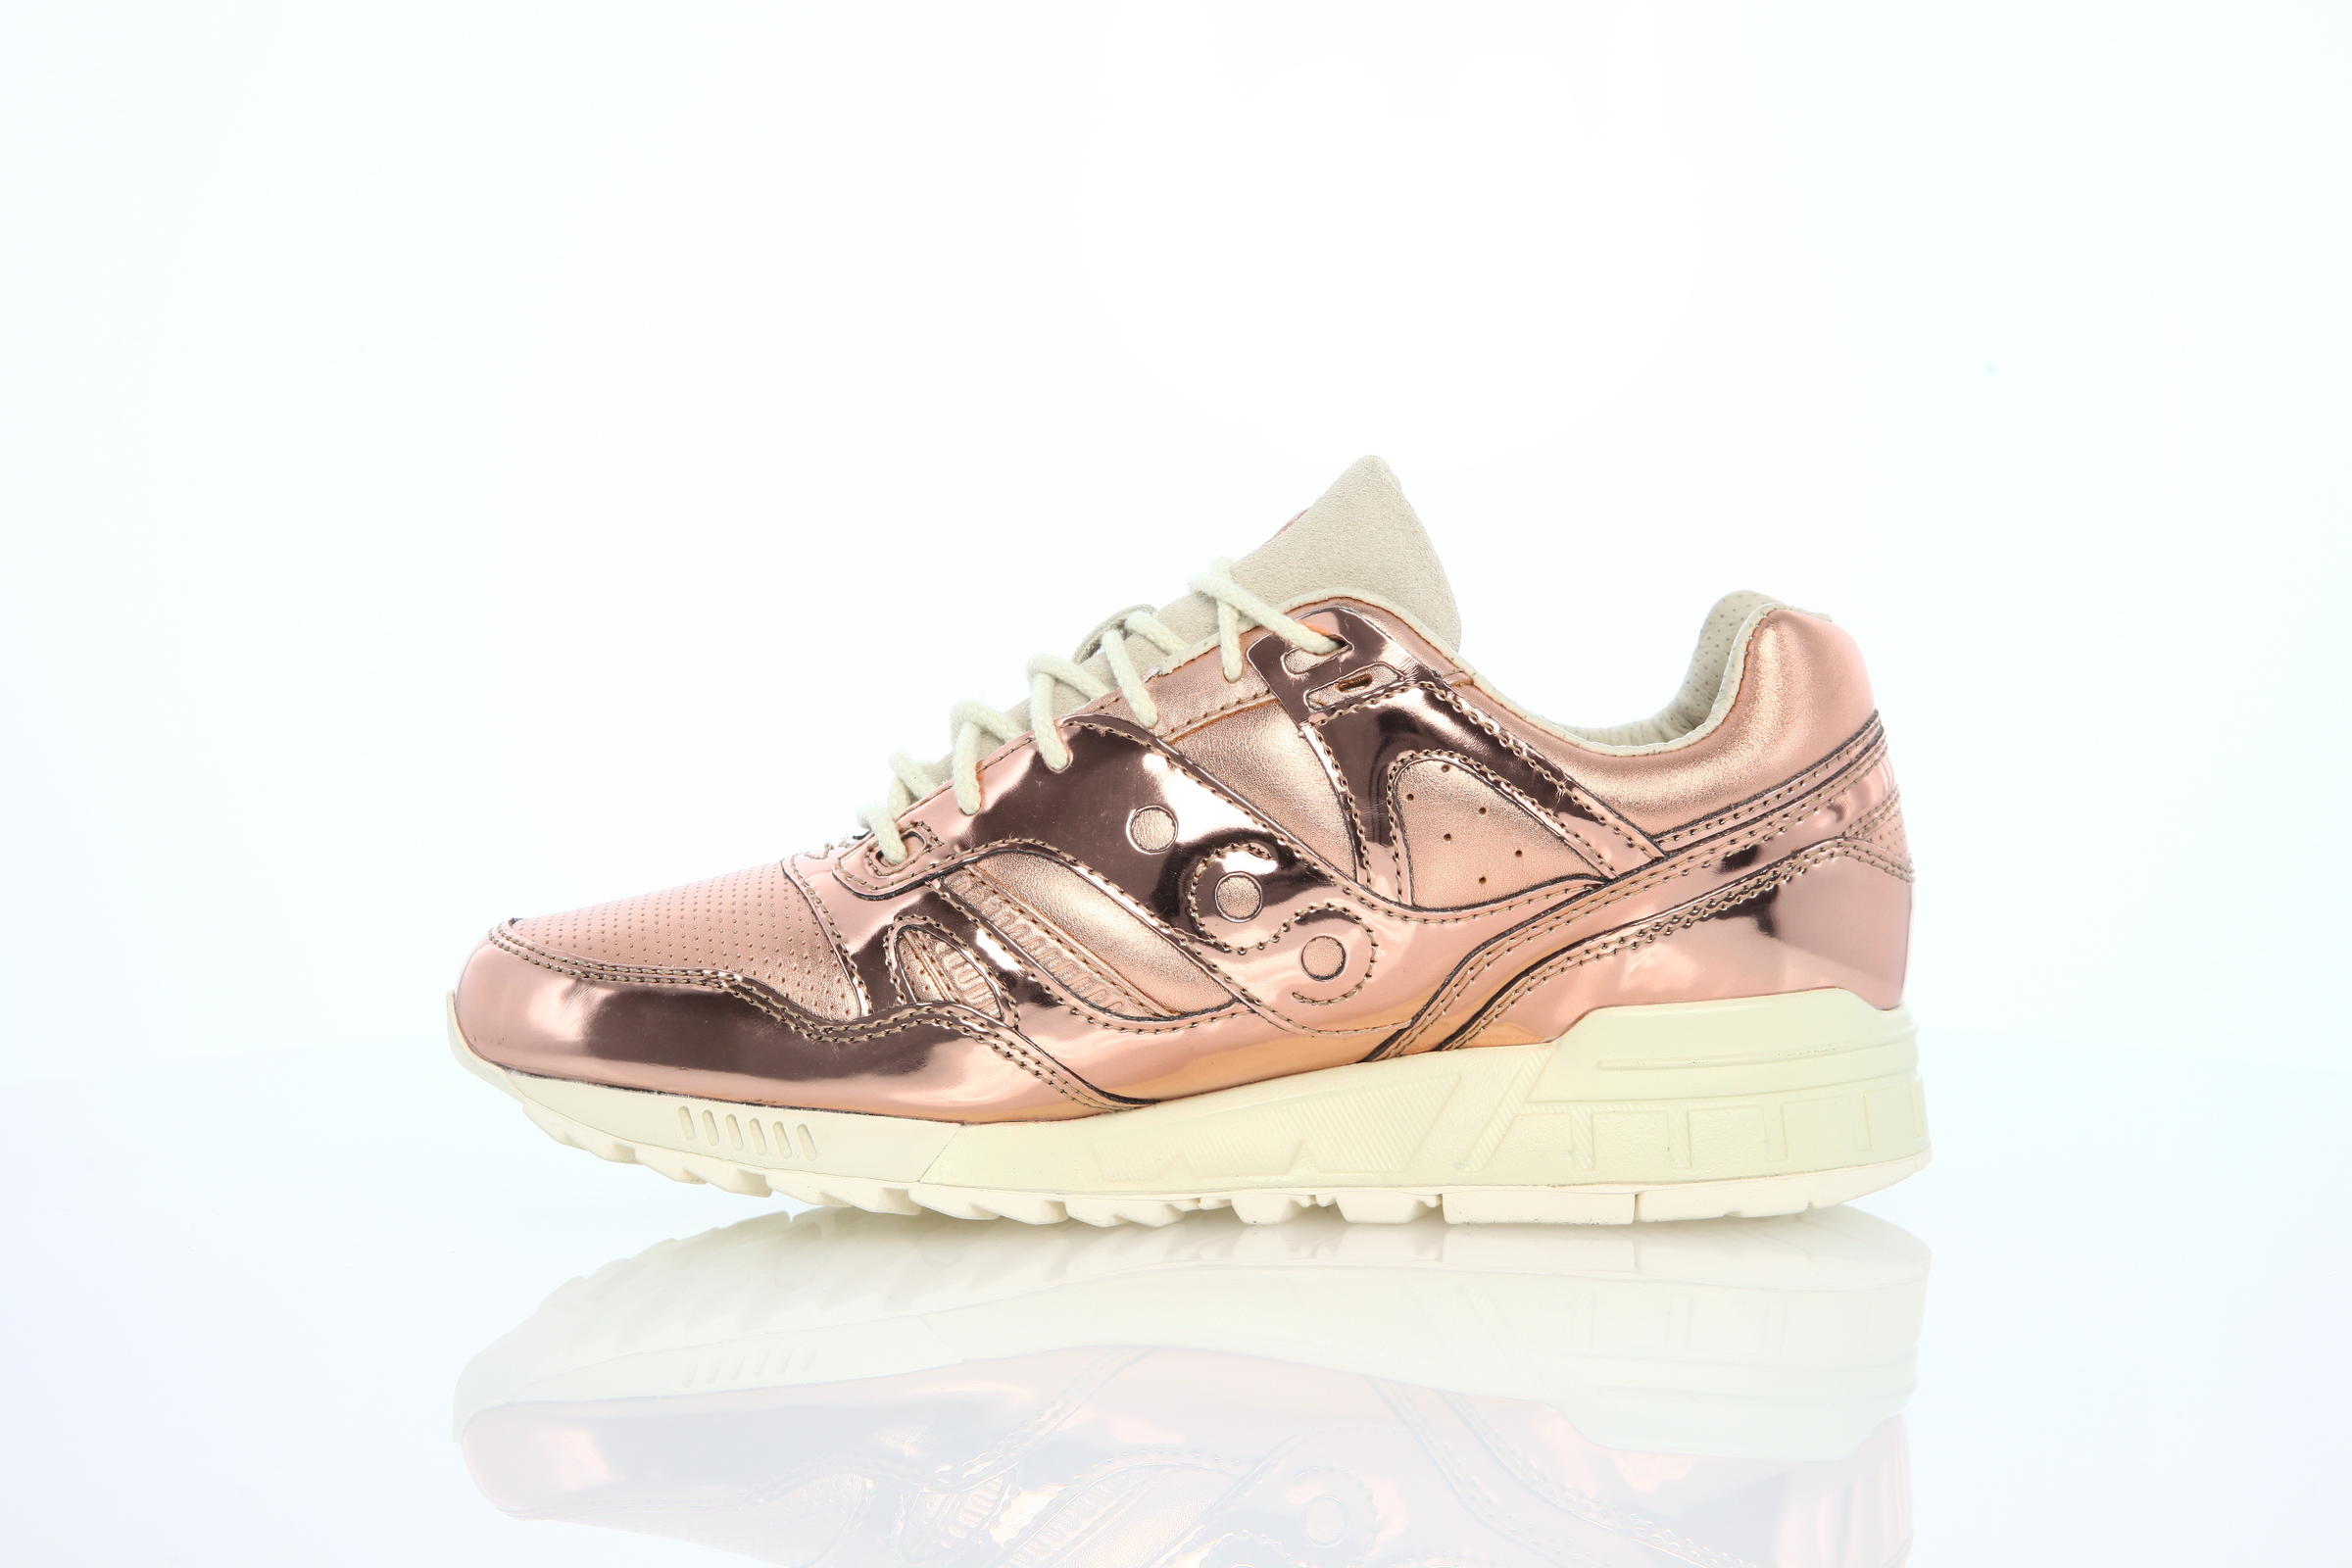 Saucony Grid Sd ether "Rose Gold"